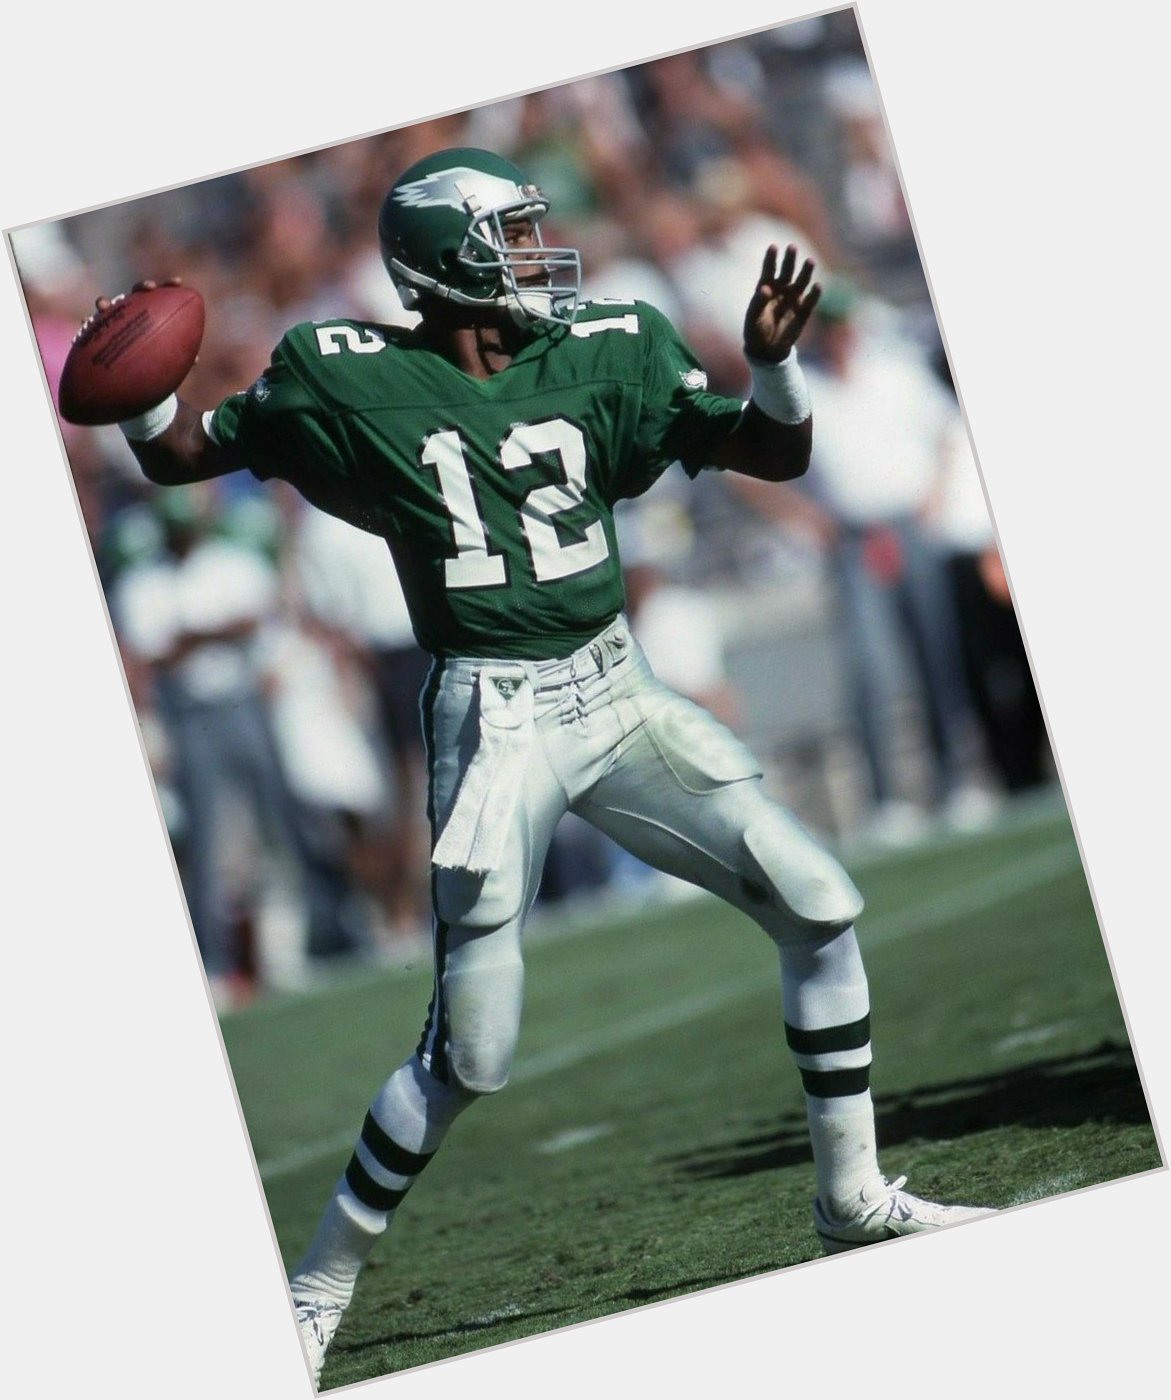 Just found out I share a birthday with this eagles legend happy birthday randall Cunningham 